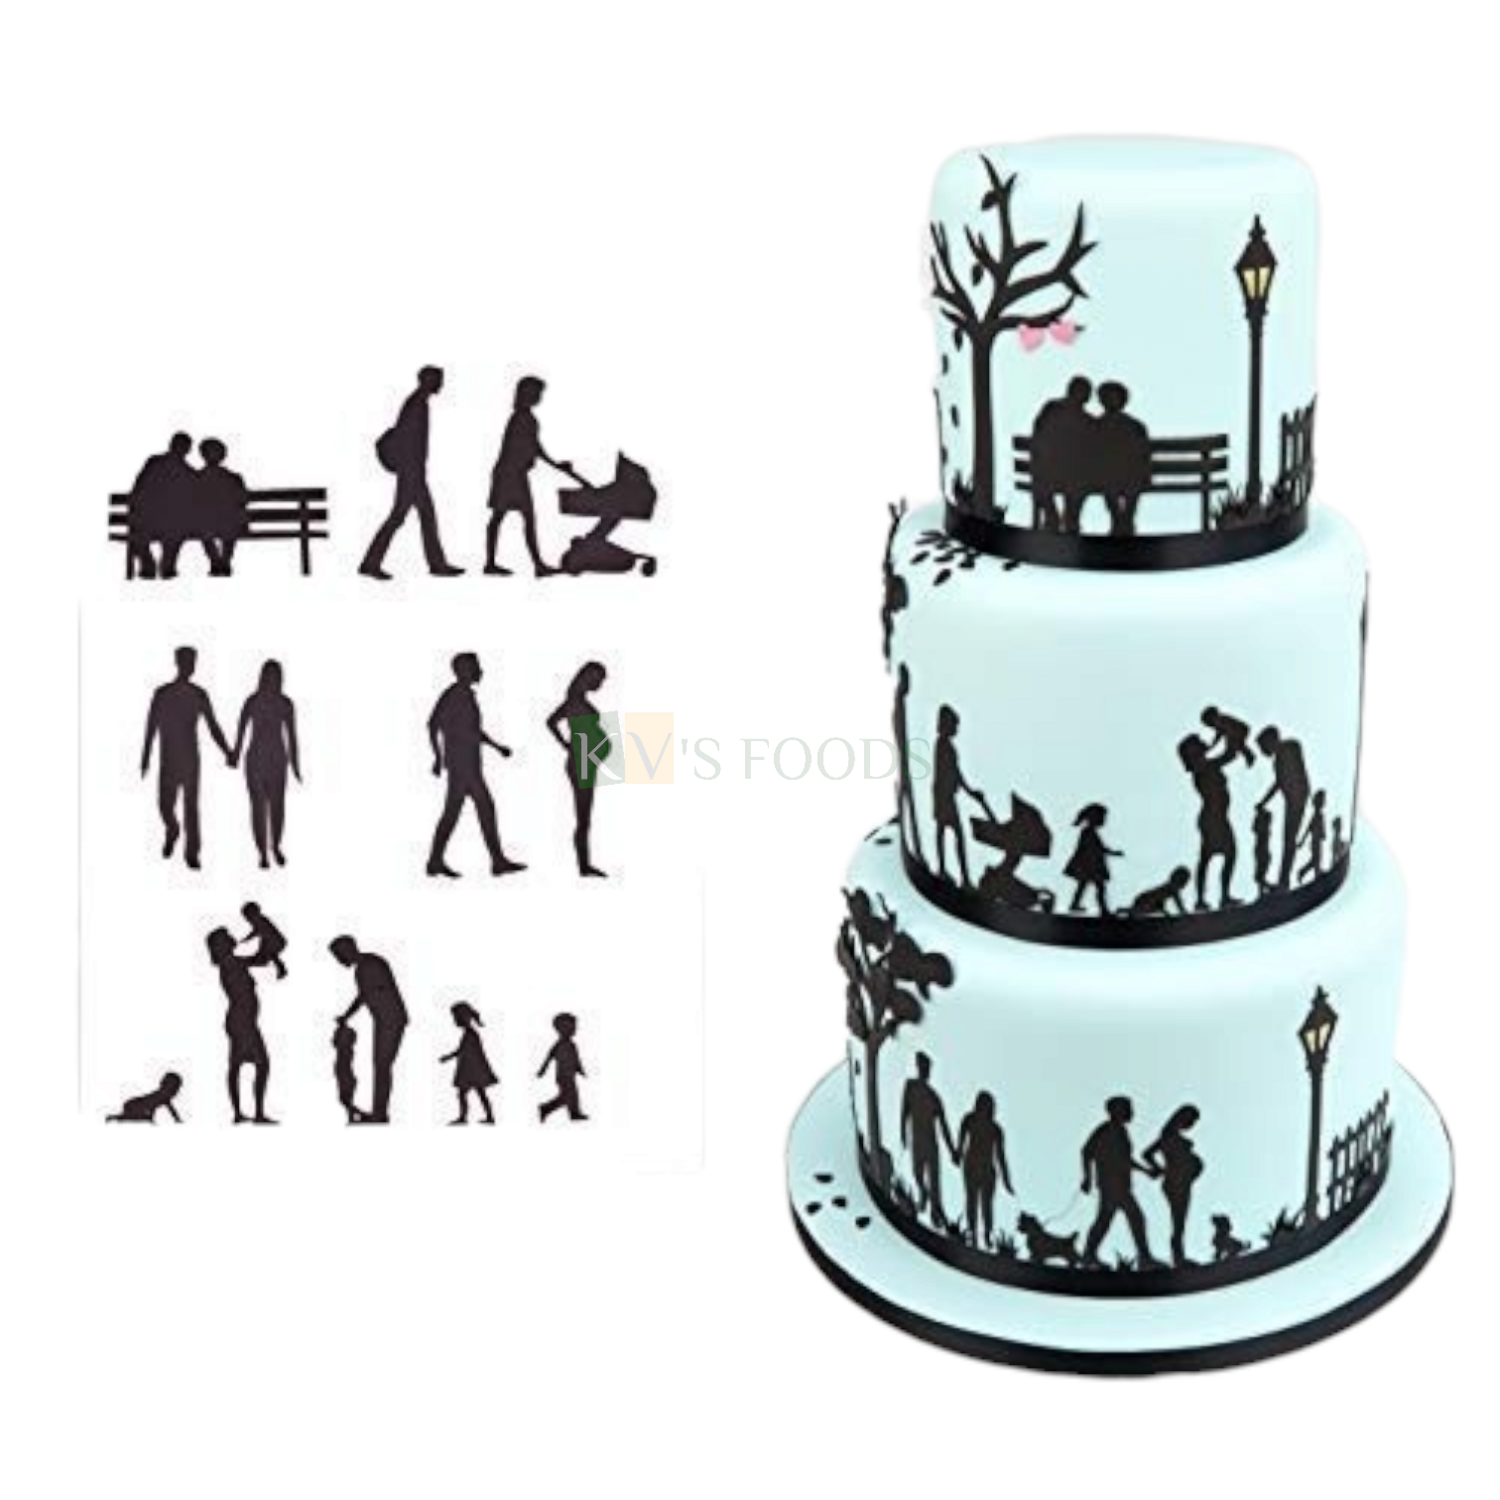 11 PCS Black Family Couples Childrens Baby Fondant Silhouette Plunger Cutters Stamps, Embossing Molds Presses Impression, Pancake Cookies Get Together, Couples Anniversary Cakes Cupcake Decoration